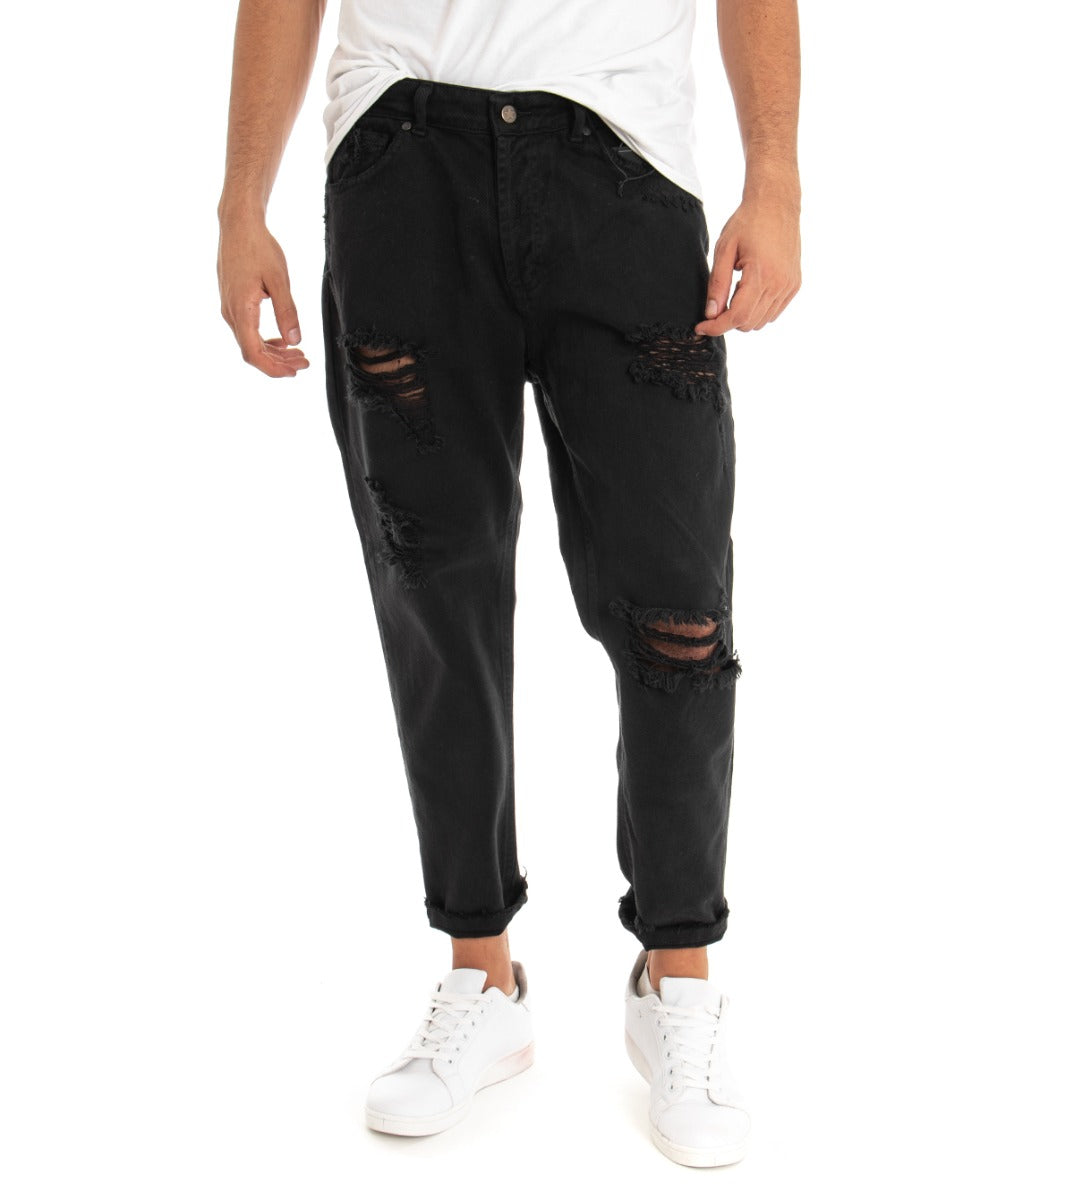 Men's Loose Fit Black Jeans Trousers With Rips Five Casual Pockets GIOSAL-P3278A